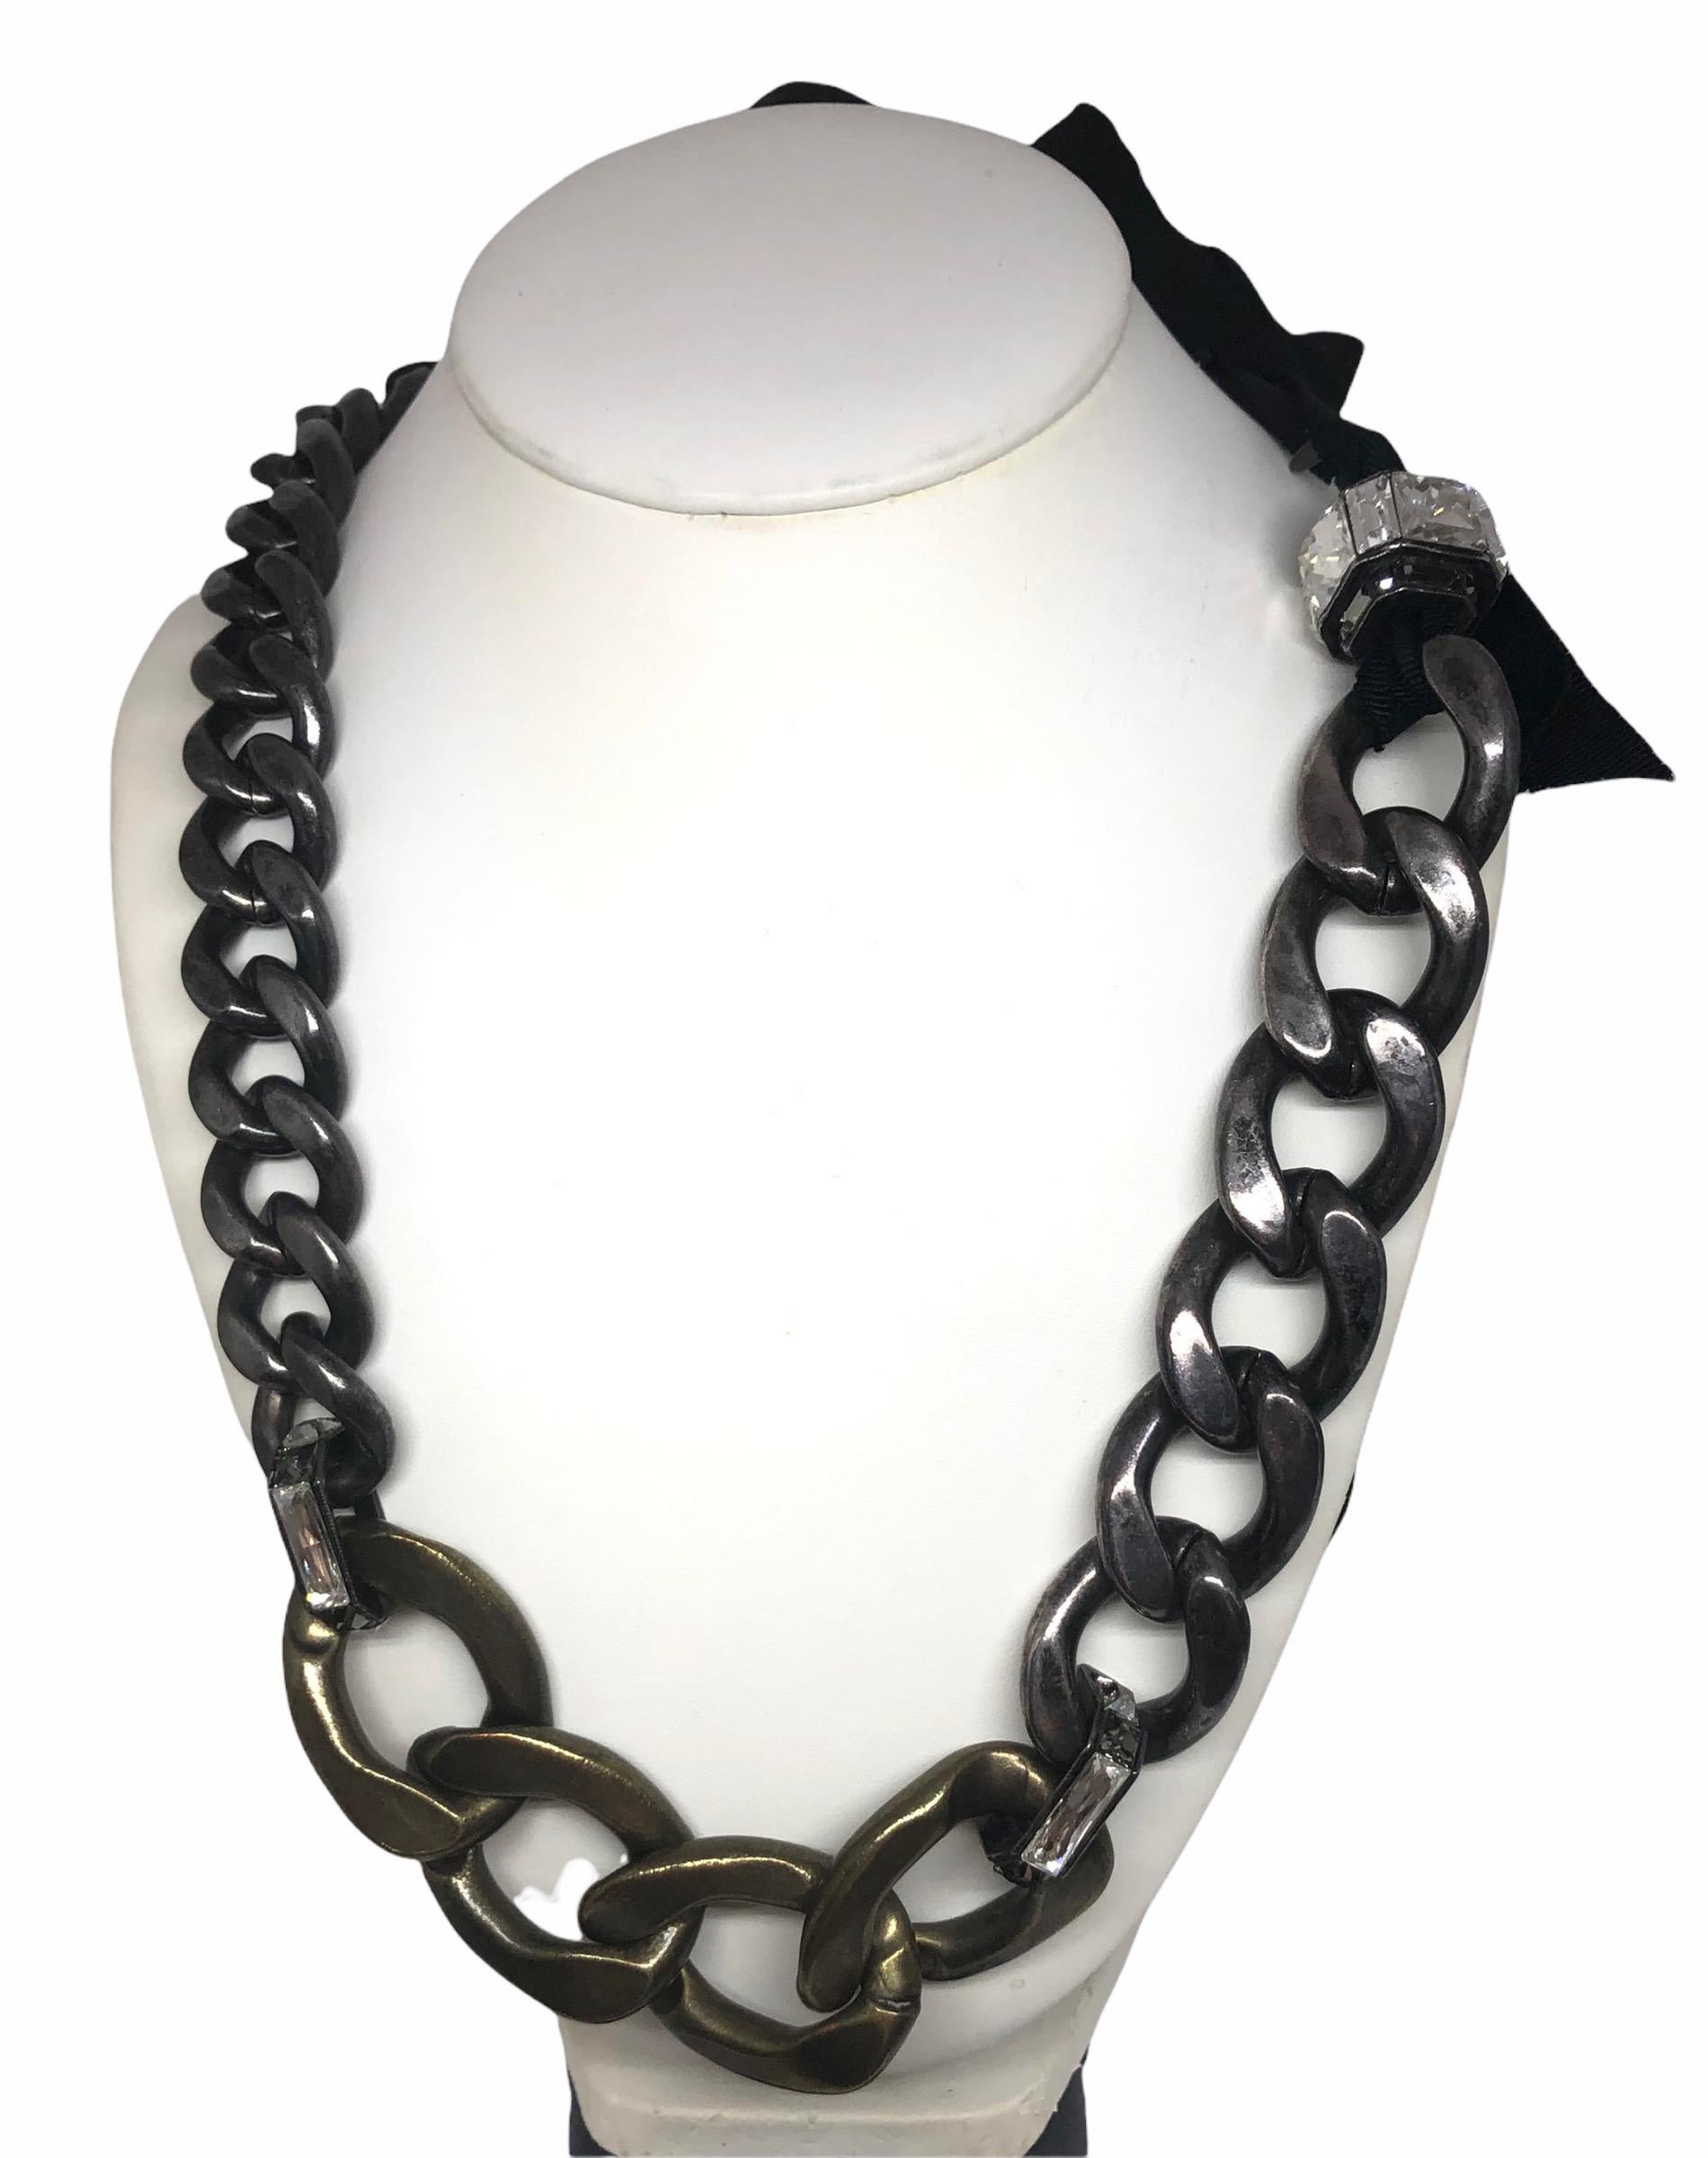 This gorgeous pre-owned and stunning necklace from the house of Lanvin during Albert Elbaz's presence as the Artistic Director, is now a collector item.
It is made of pewter gourmette links chain and crystal pieces with a black grosgrain for